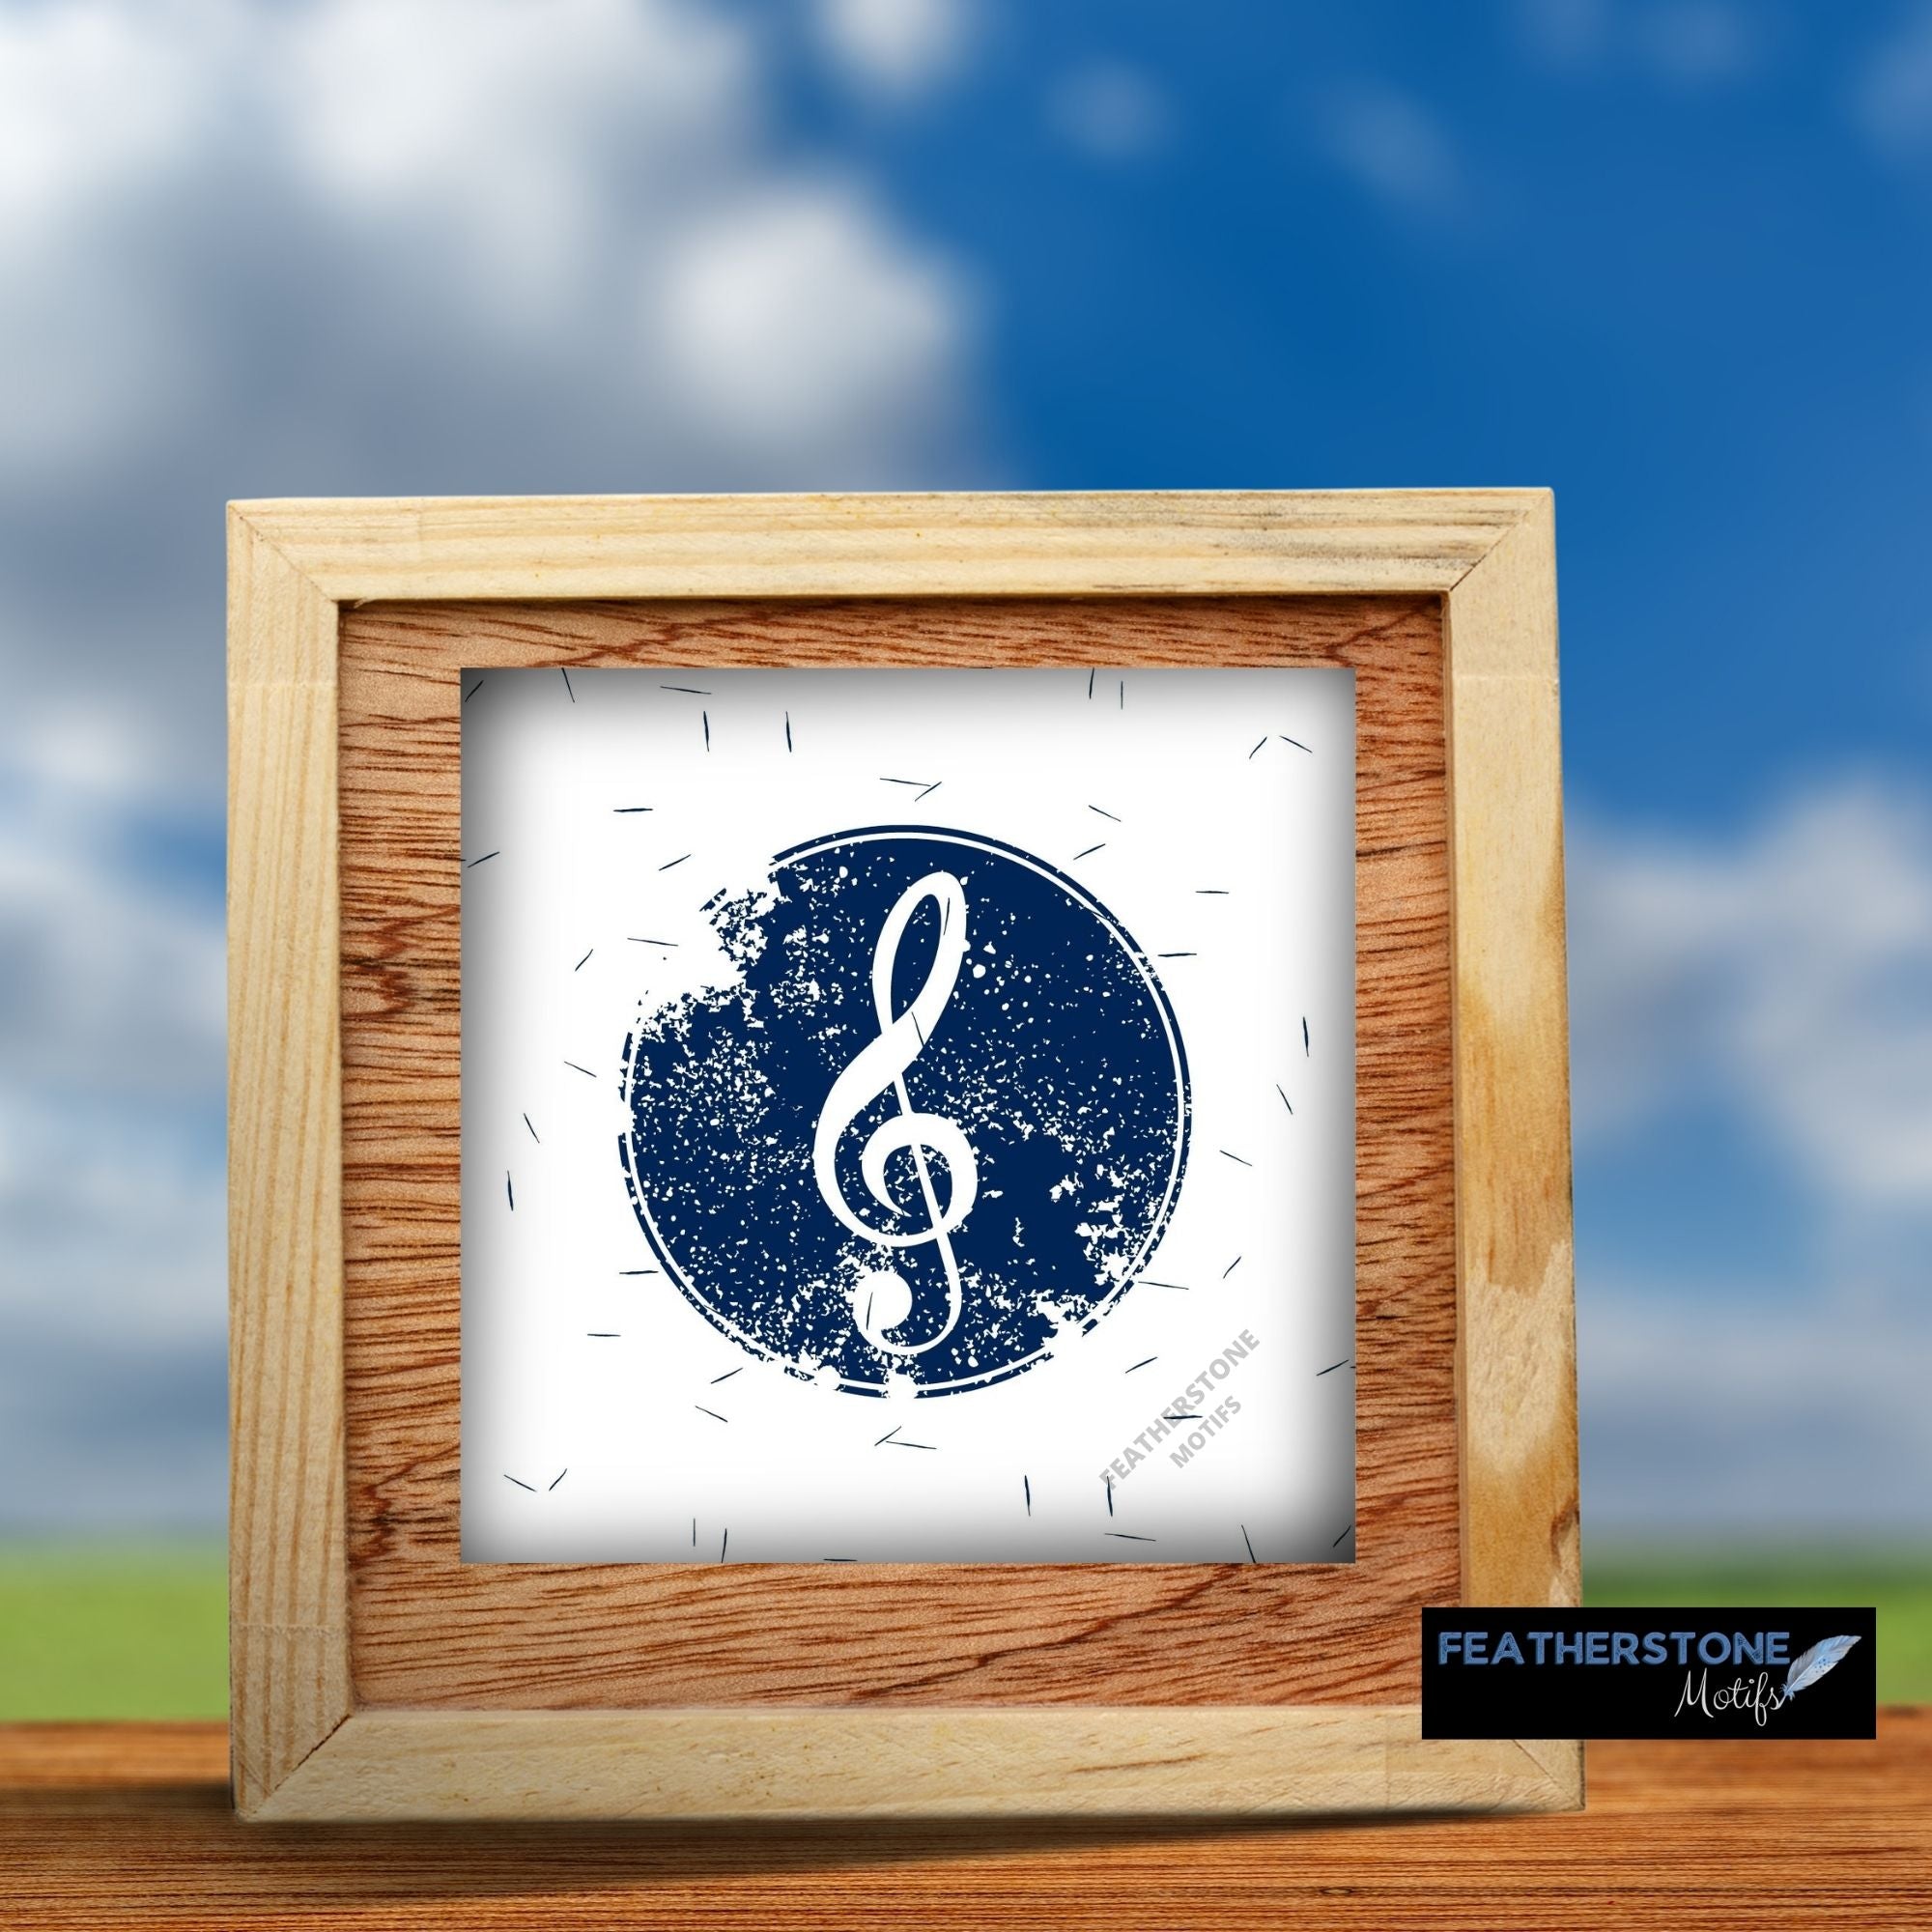 This set of 30 digital images is perfect for all music lovers! Use for craft projects like handmade coasters and greeting cards, or frame and hang them on the wall.